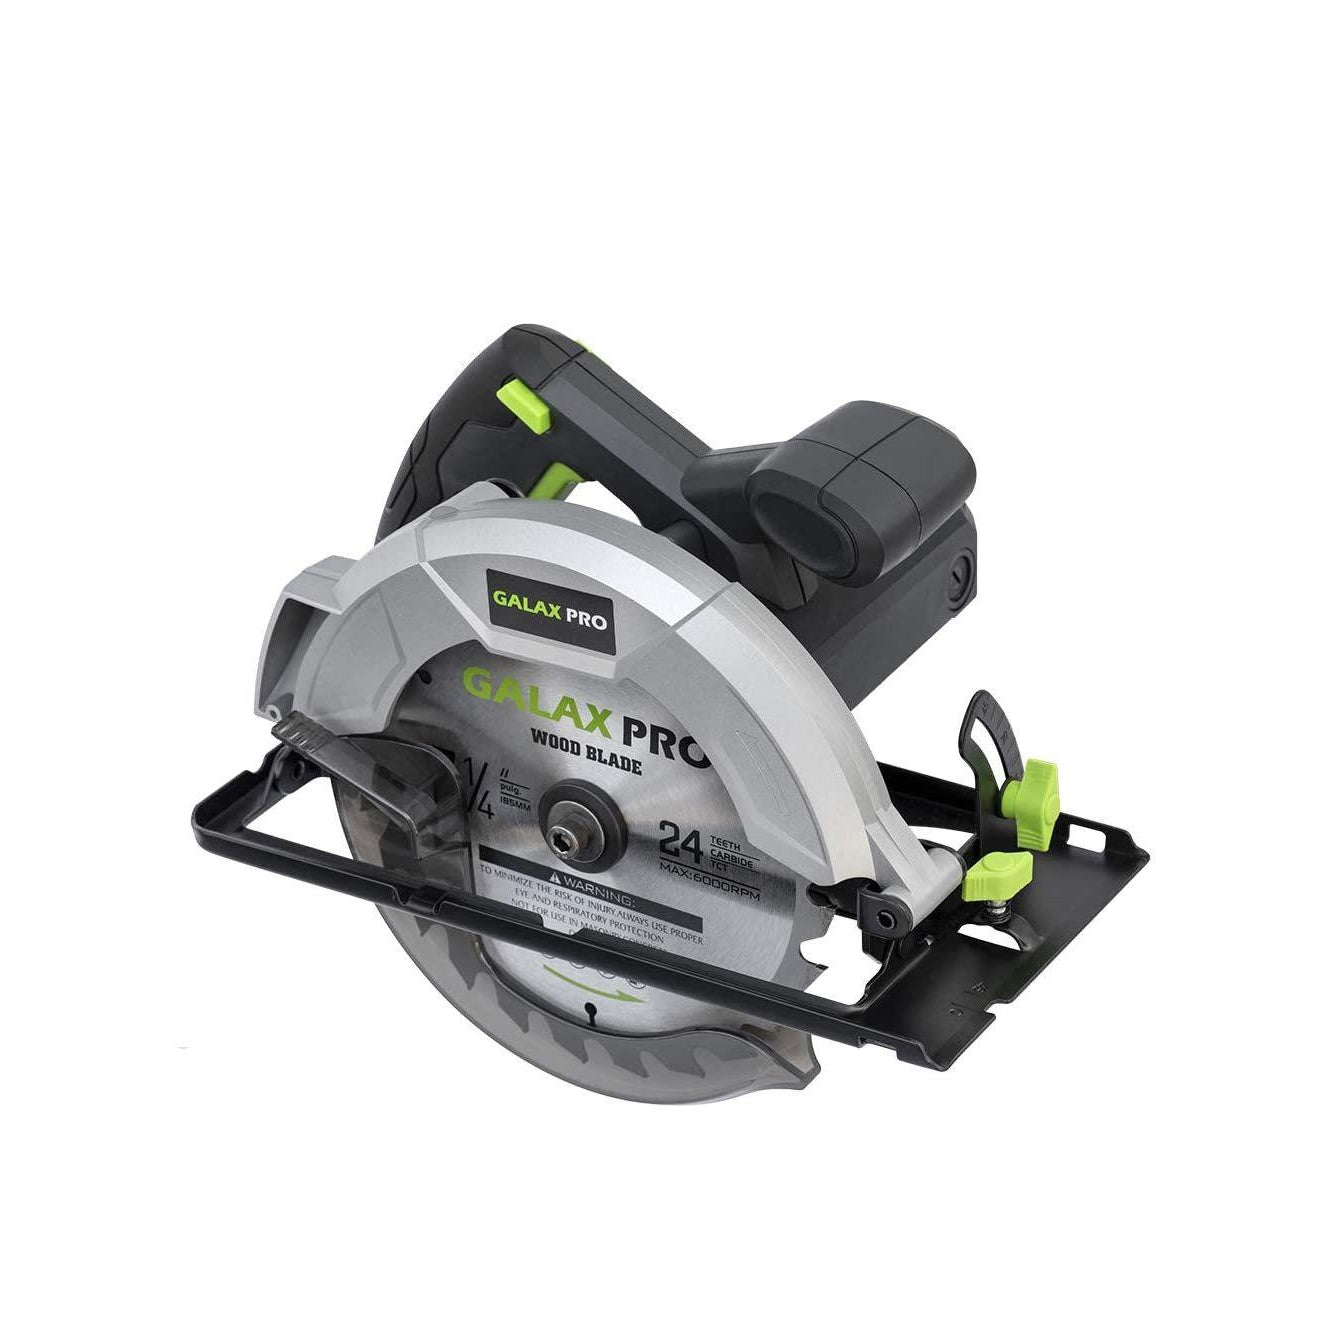 Galax Pro 76331 Circular Saw 1200W, 10 Amp, 5800 RPM, Bevel Angle (0 to 45 °), 7-1 / 4-Inch Blade Joint Cuts